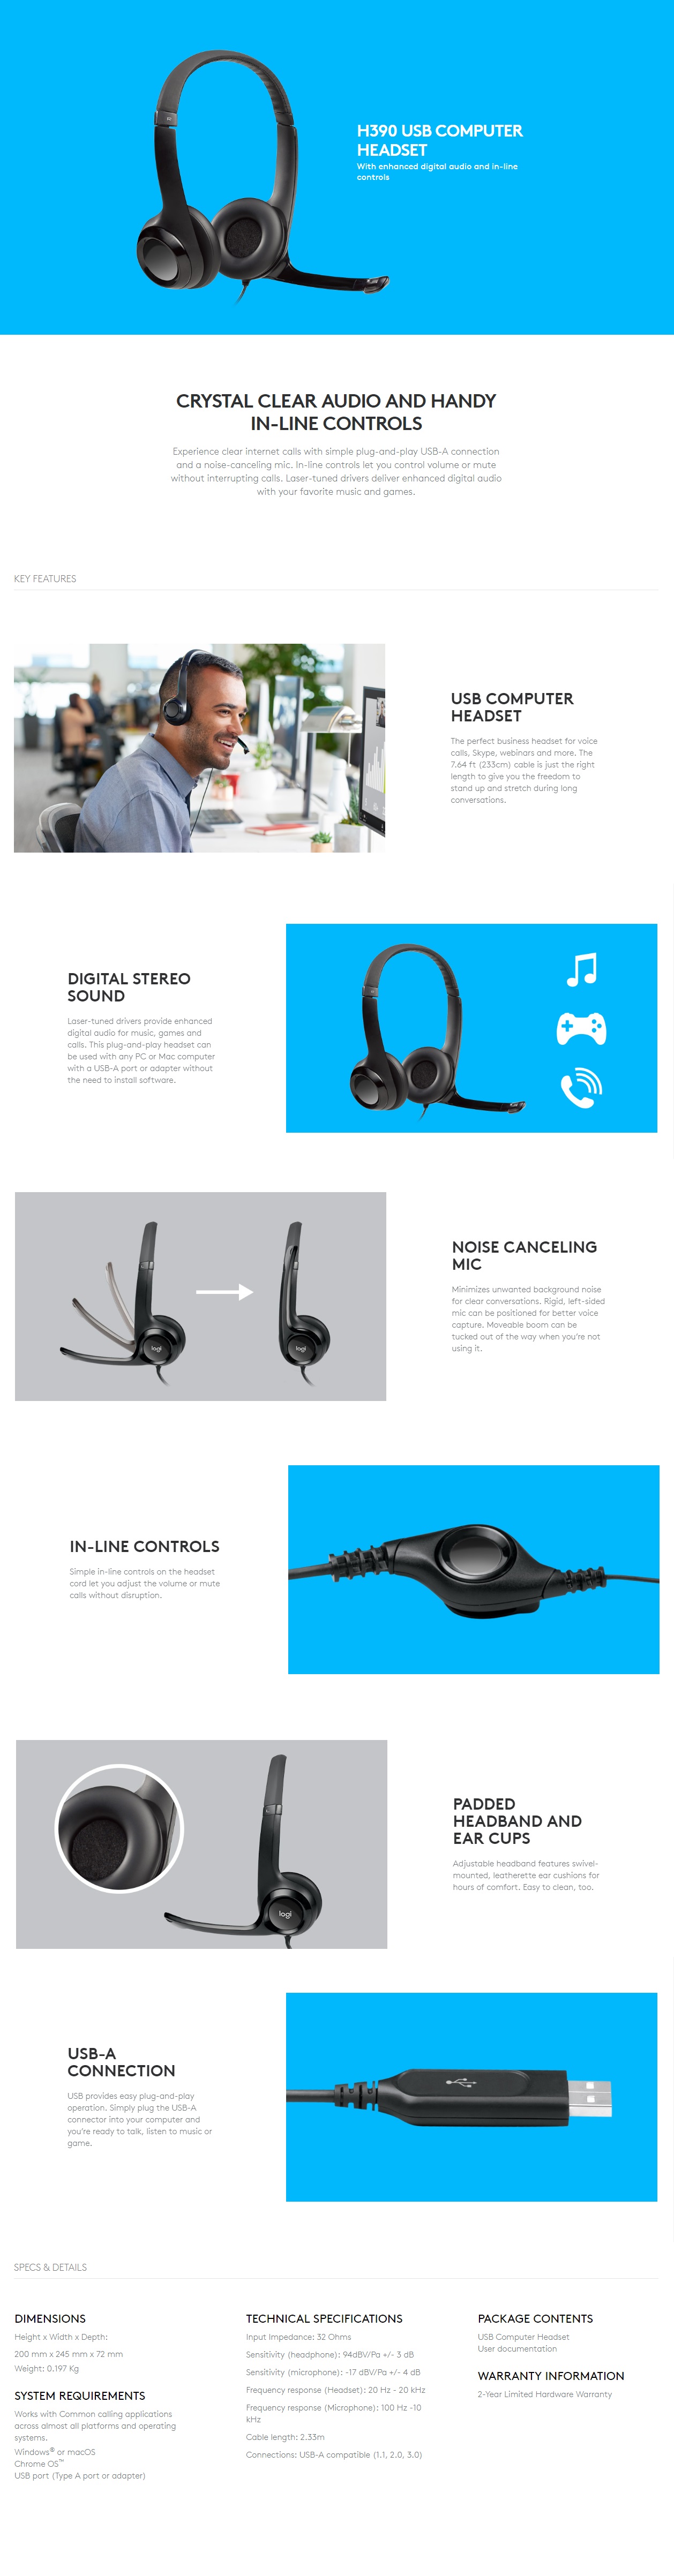  Headset: H390 USB with MIC clear chat comfort  